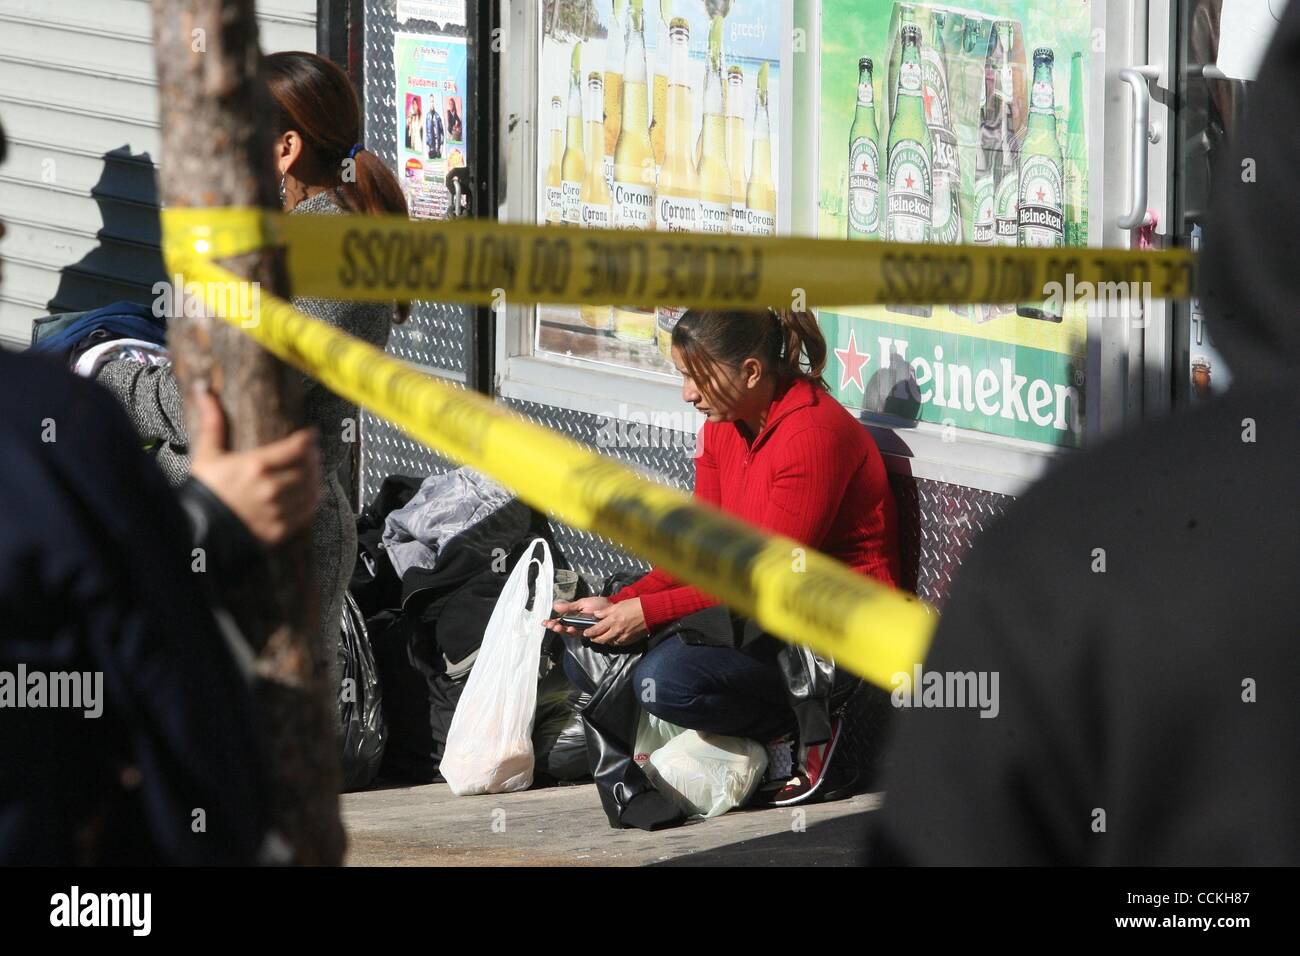 Nov 28, 2010 - Bronx, New York, U.S. - Fire victim in the Bronx building on  East 169th. St. where a man died and left homeless hundreds of people. (Credit Image: © Mariela Lombard/ZUMApress.com) Stock Photo